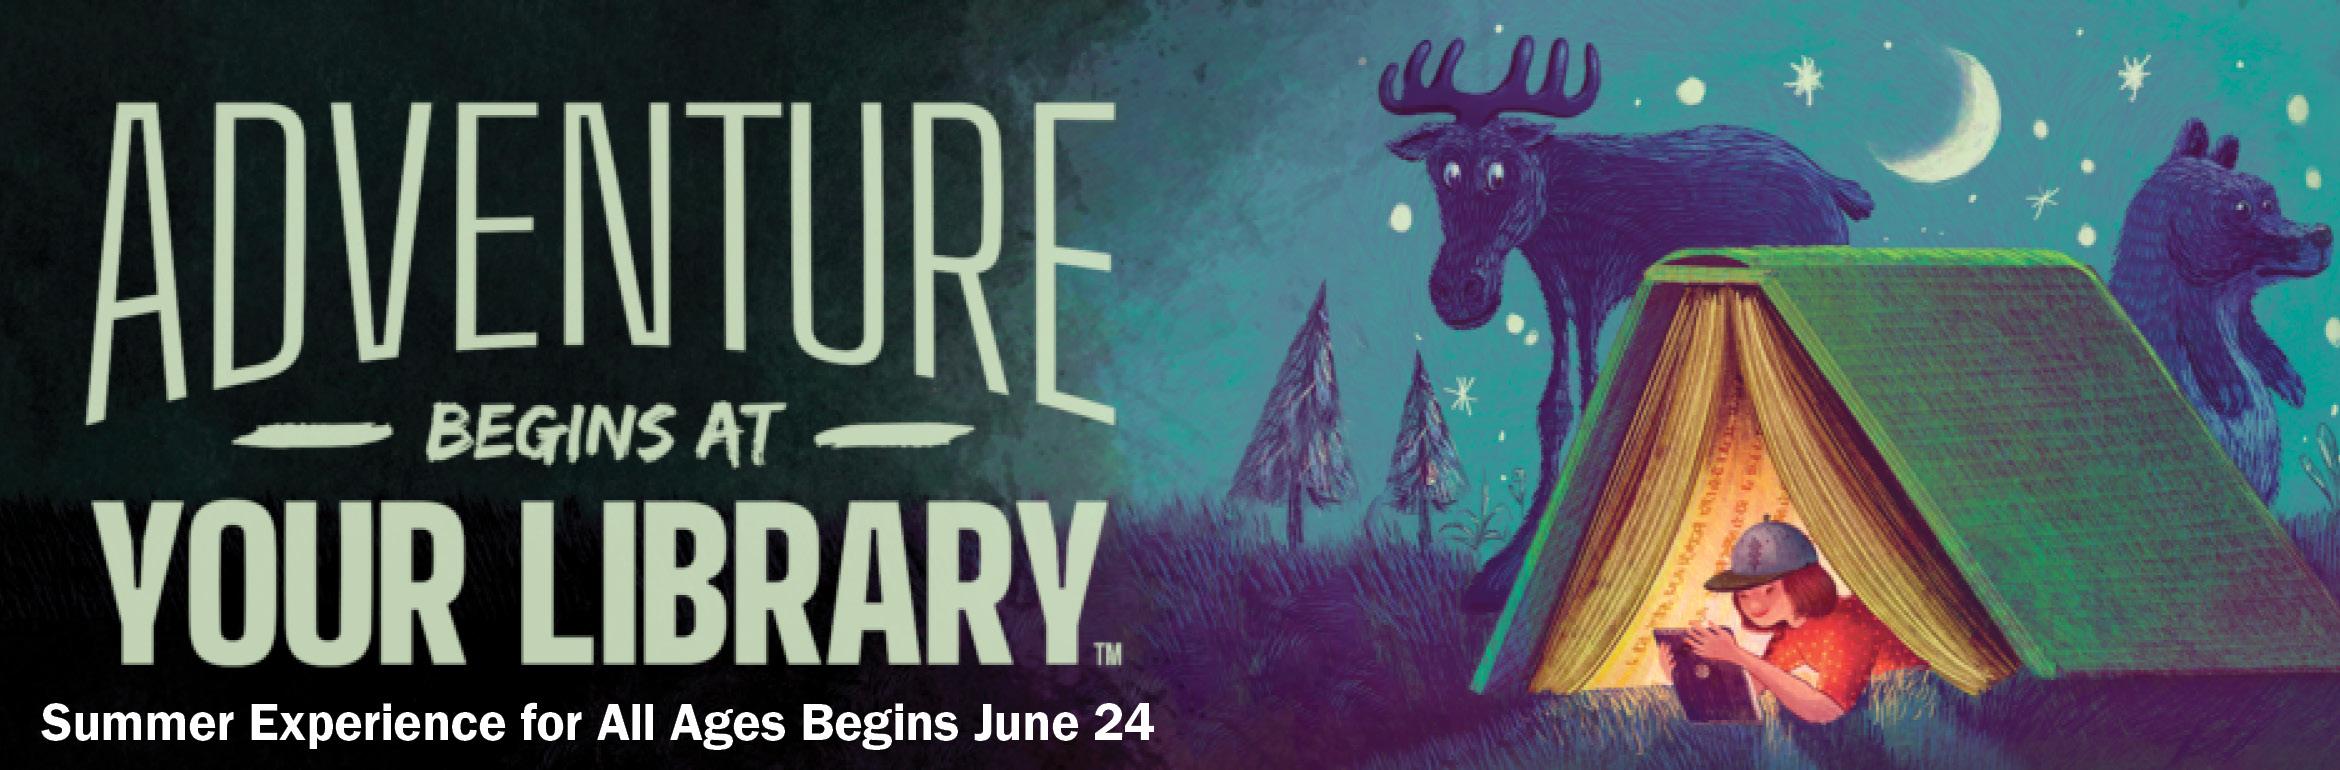 Adventure Begins at Your Library. Summer Experience for All Ages Begins June 24.